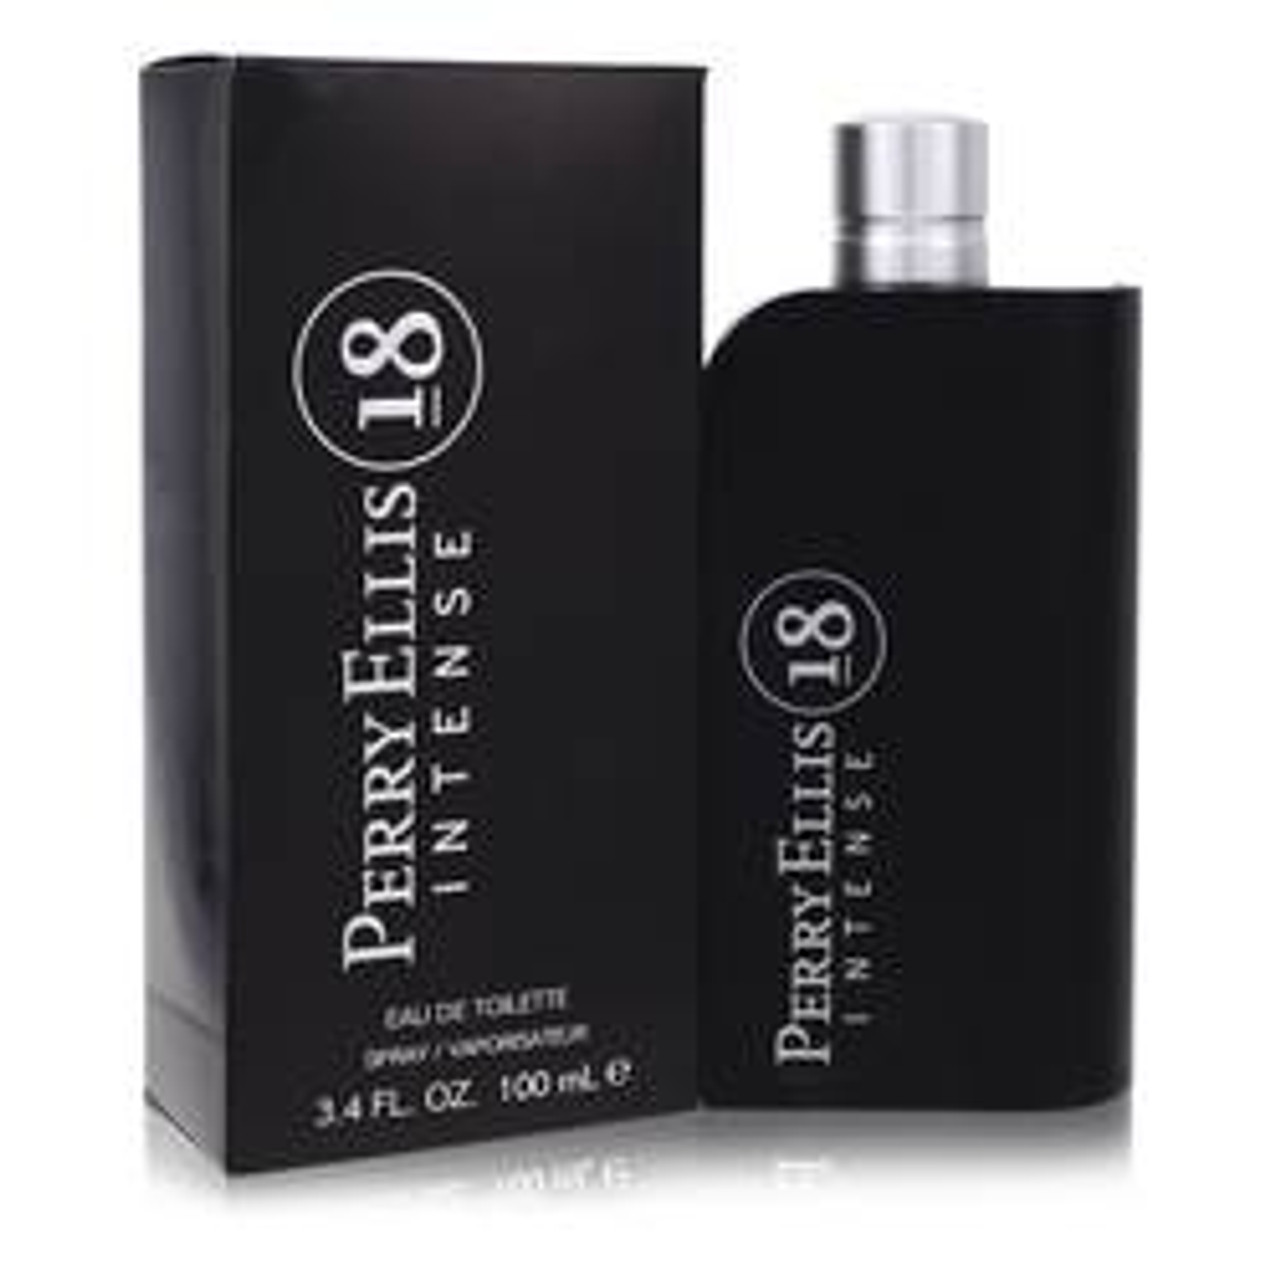 Perry Ellis 18 Intense Cologne By Perry Ellis Eau De Toilette Spray 3.4 oz for Men - [From 55.00 - Choose pk Qty ] - *Ships from Miami